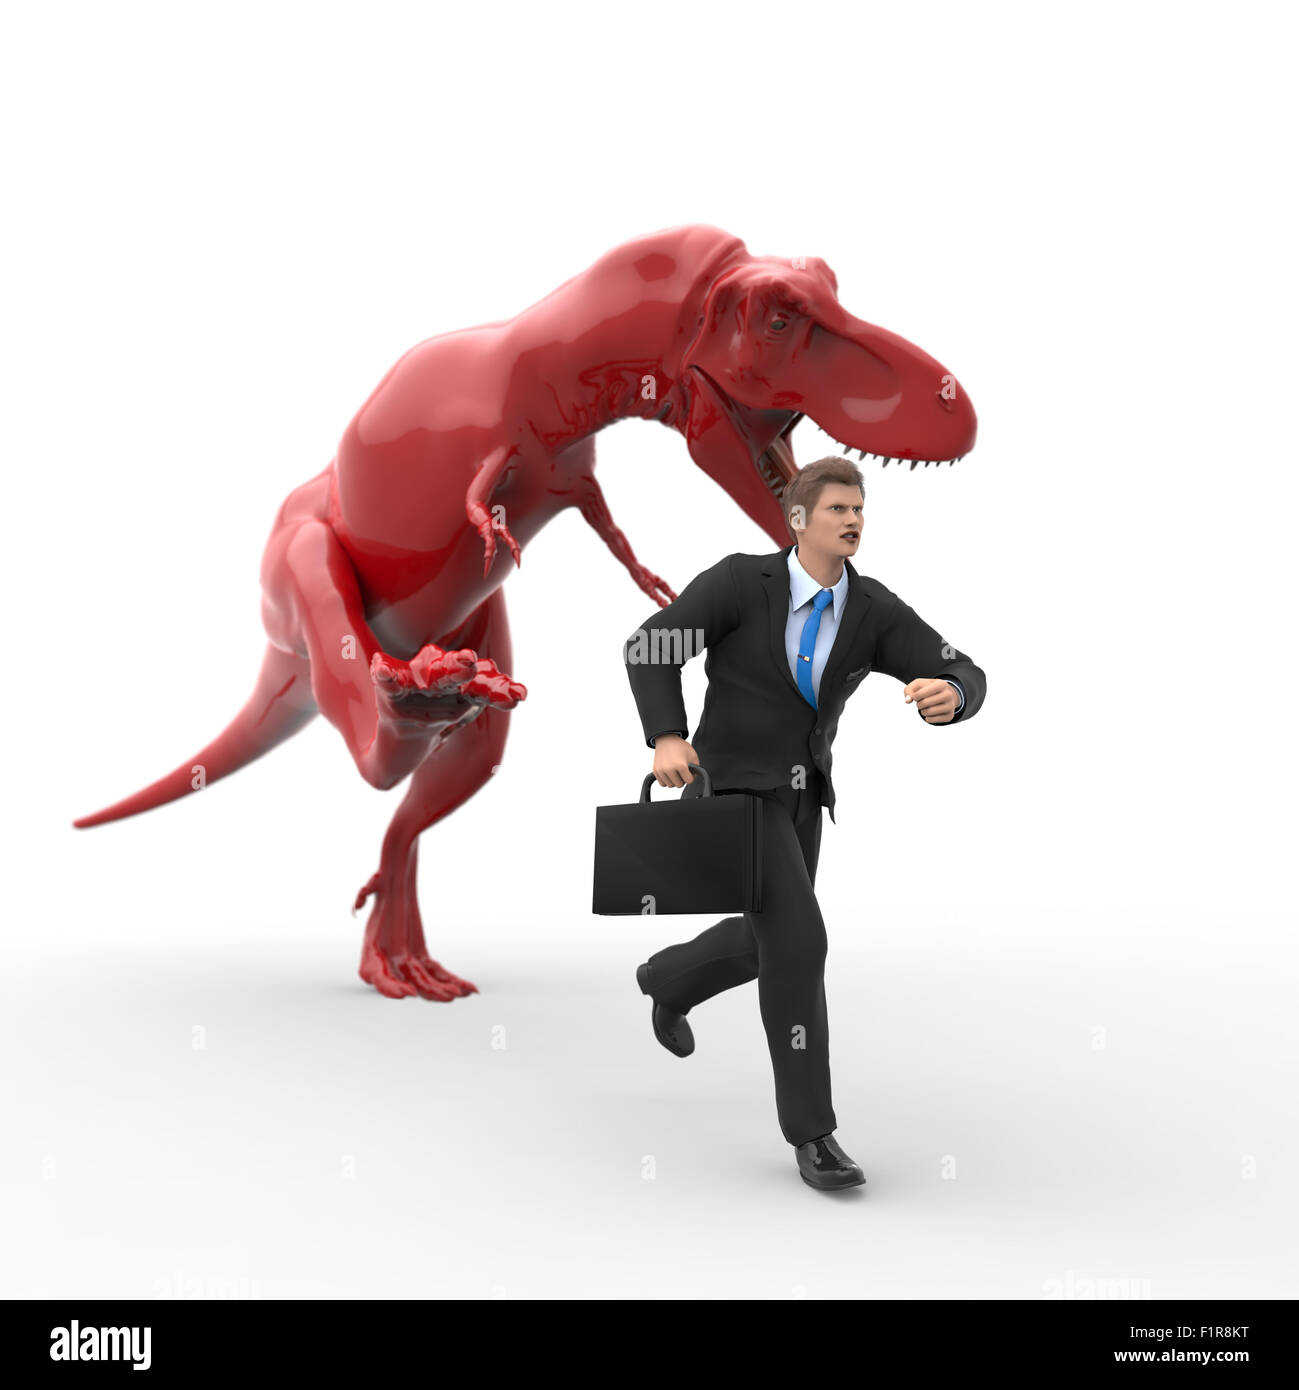 dinosaur hunting for a businessman Stock Photo